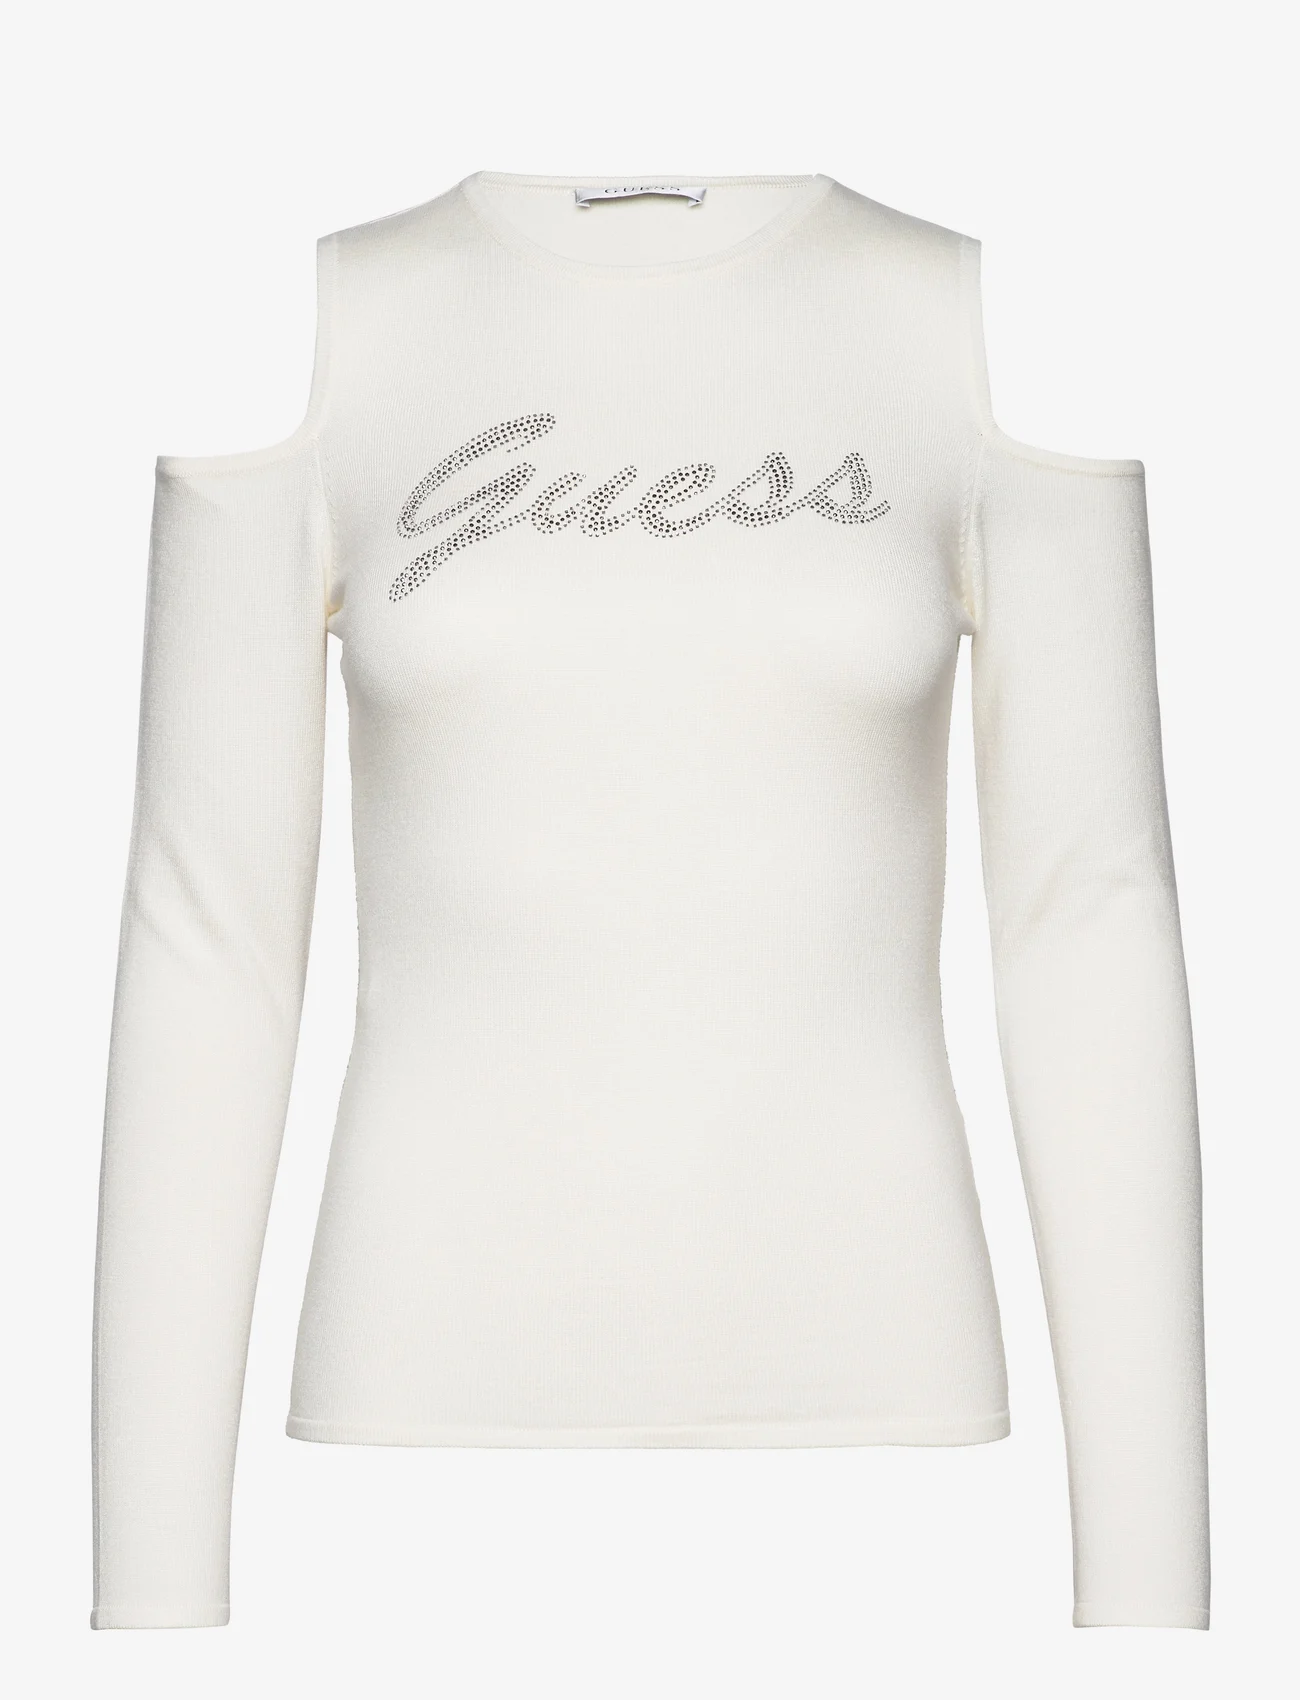 GUESS Jeans - LS COLD SHLDR GUESS LOGO SWTR - langärmlige tops - dove white - 0